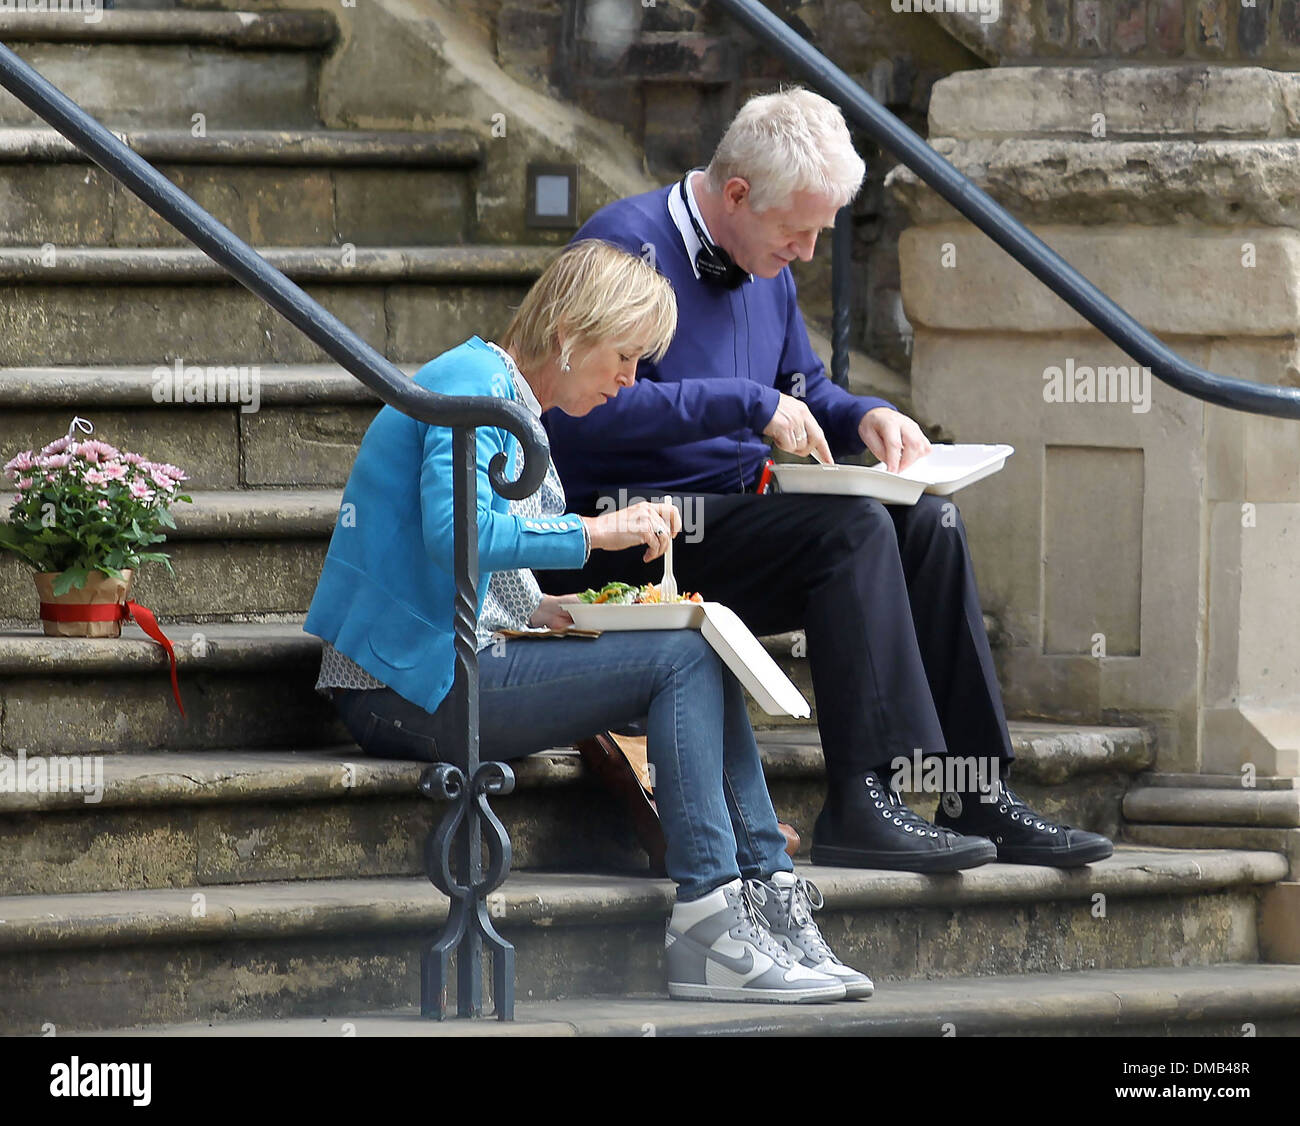 Director Richard Curtis enjoying a lunch break on final day filming retakes on location at Abbey Road for 'About Time' movie Stock Photo